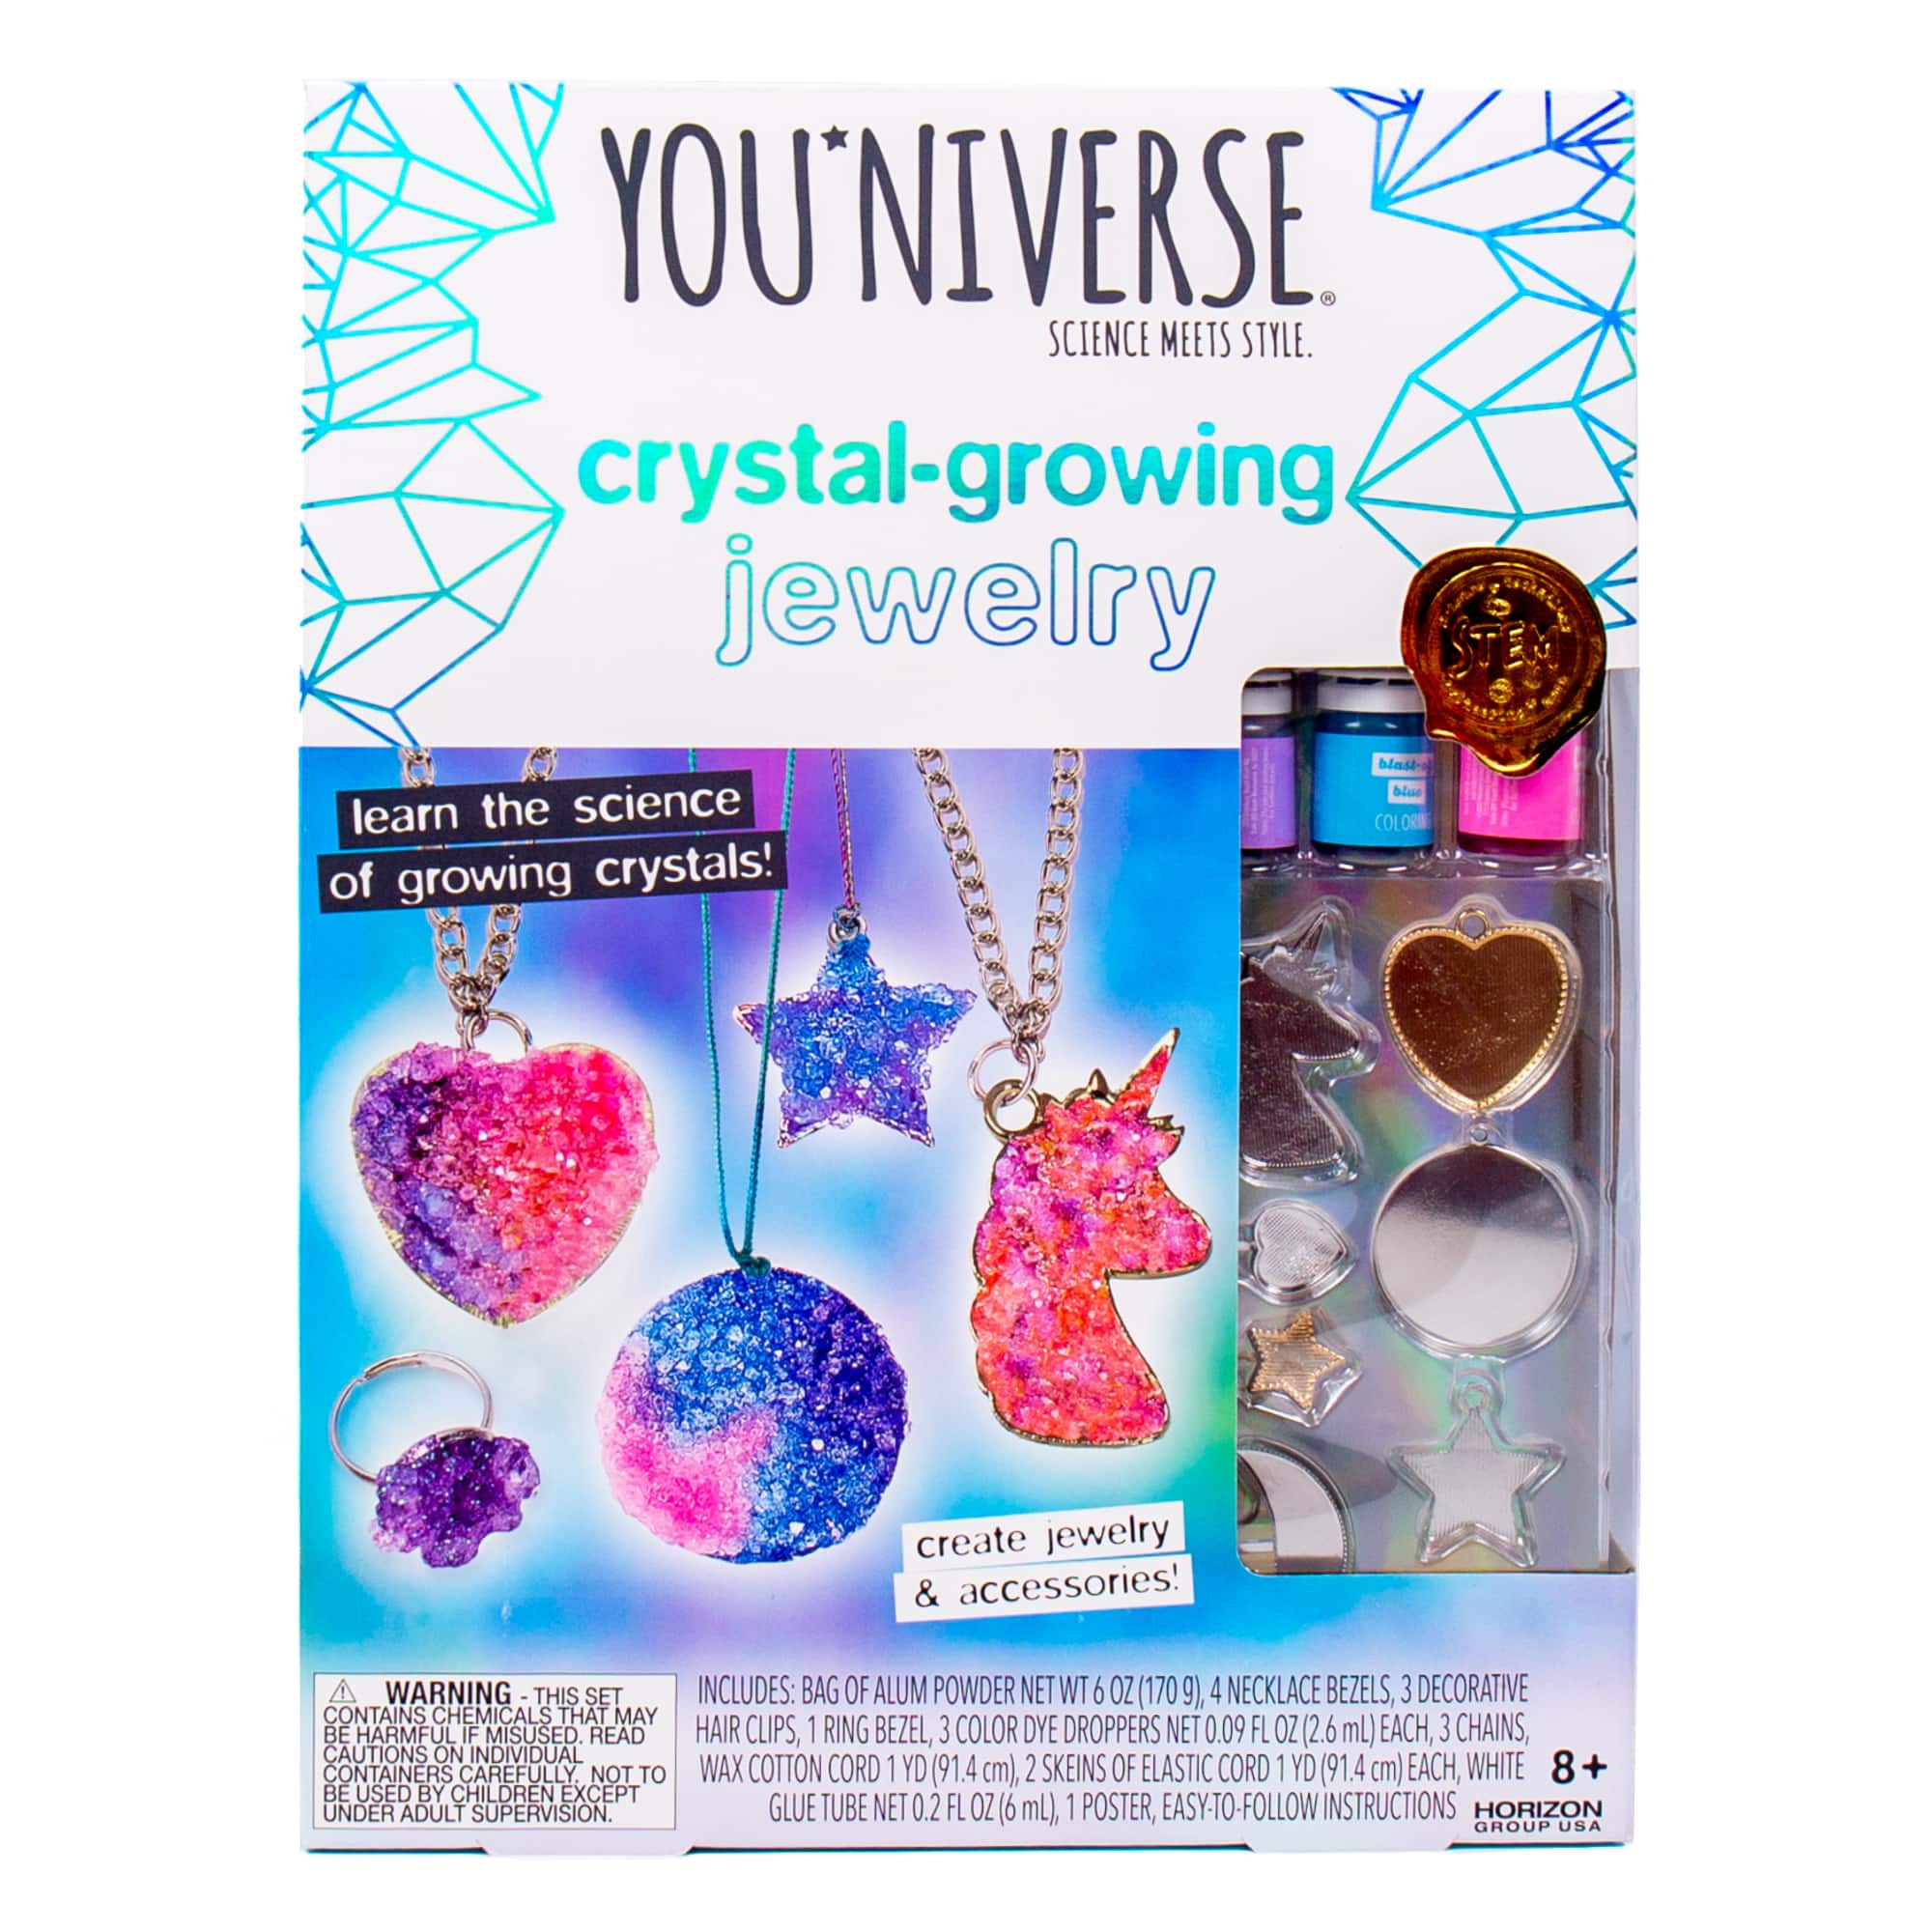 DIY Crystal Paint Arts and Crafts Set, Crystal Painting DIY, DIY Diamond Painting  Kits for Kids, Crystal Paint Arts and Crafts Set, Bake-Free Crystal Color  Glue Painting Pendant Toy 